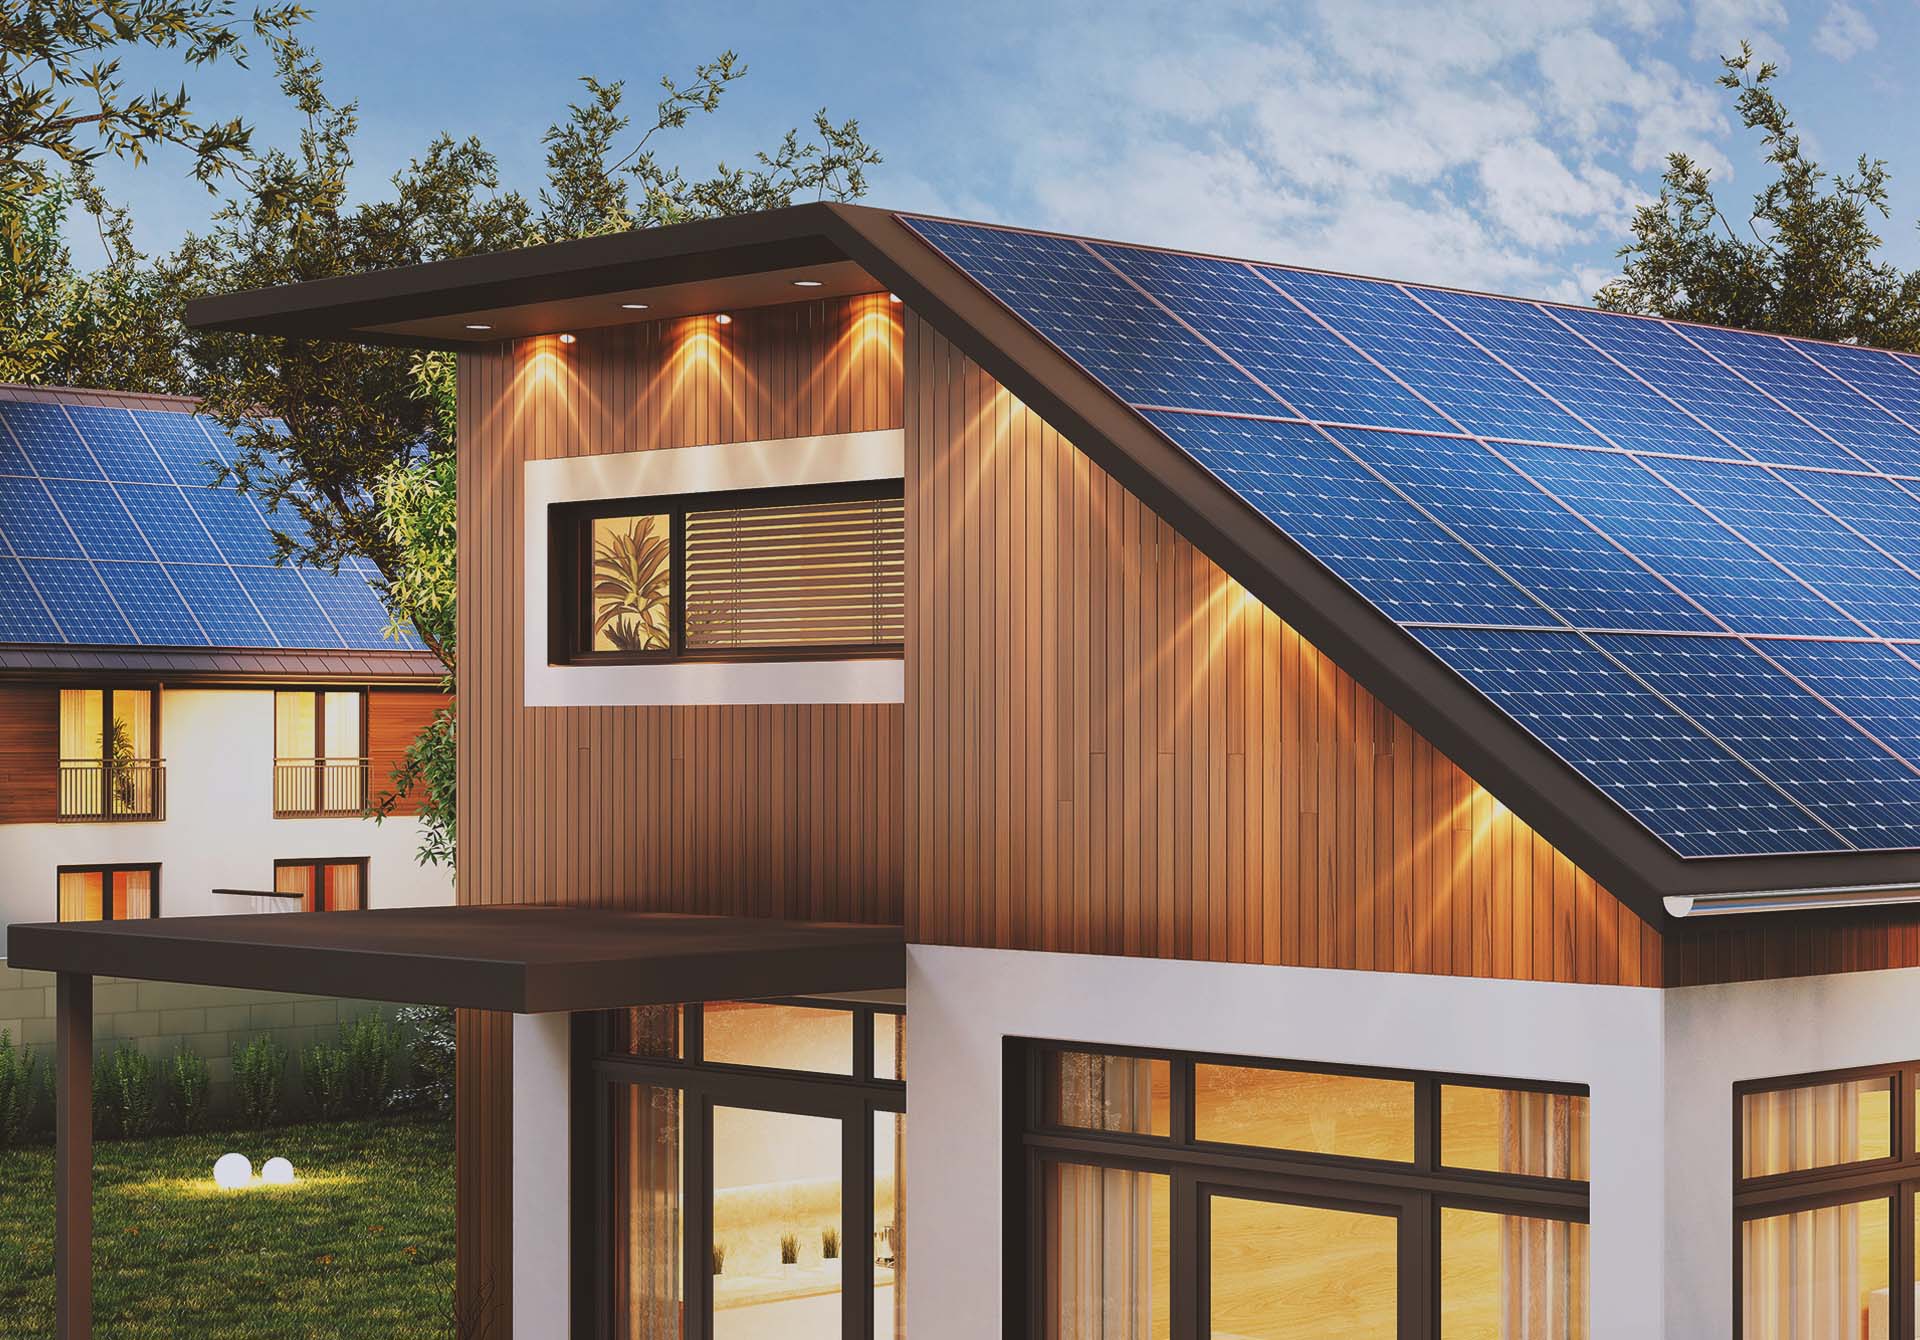 Solar panels to power your home? Here's what you need to know